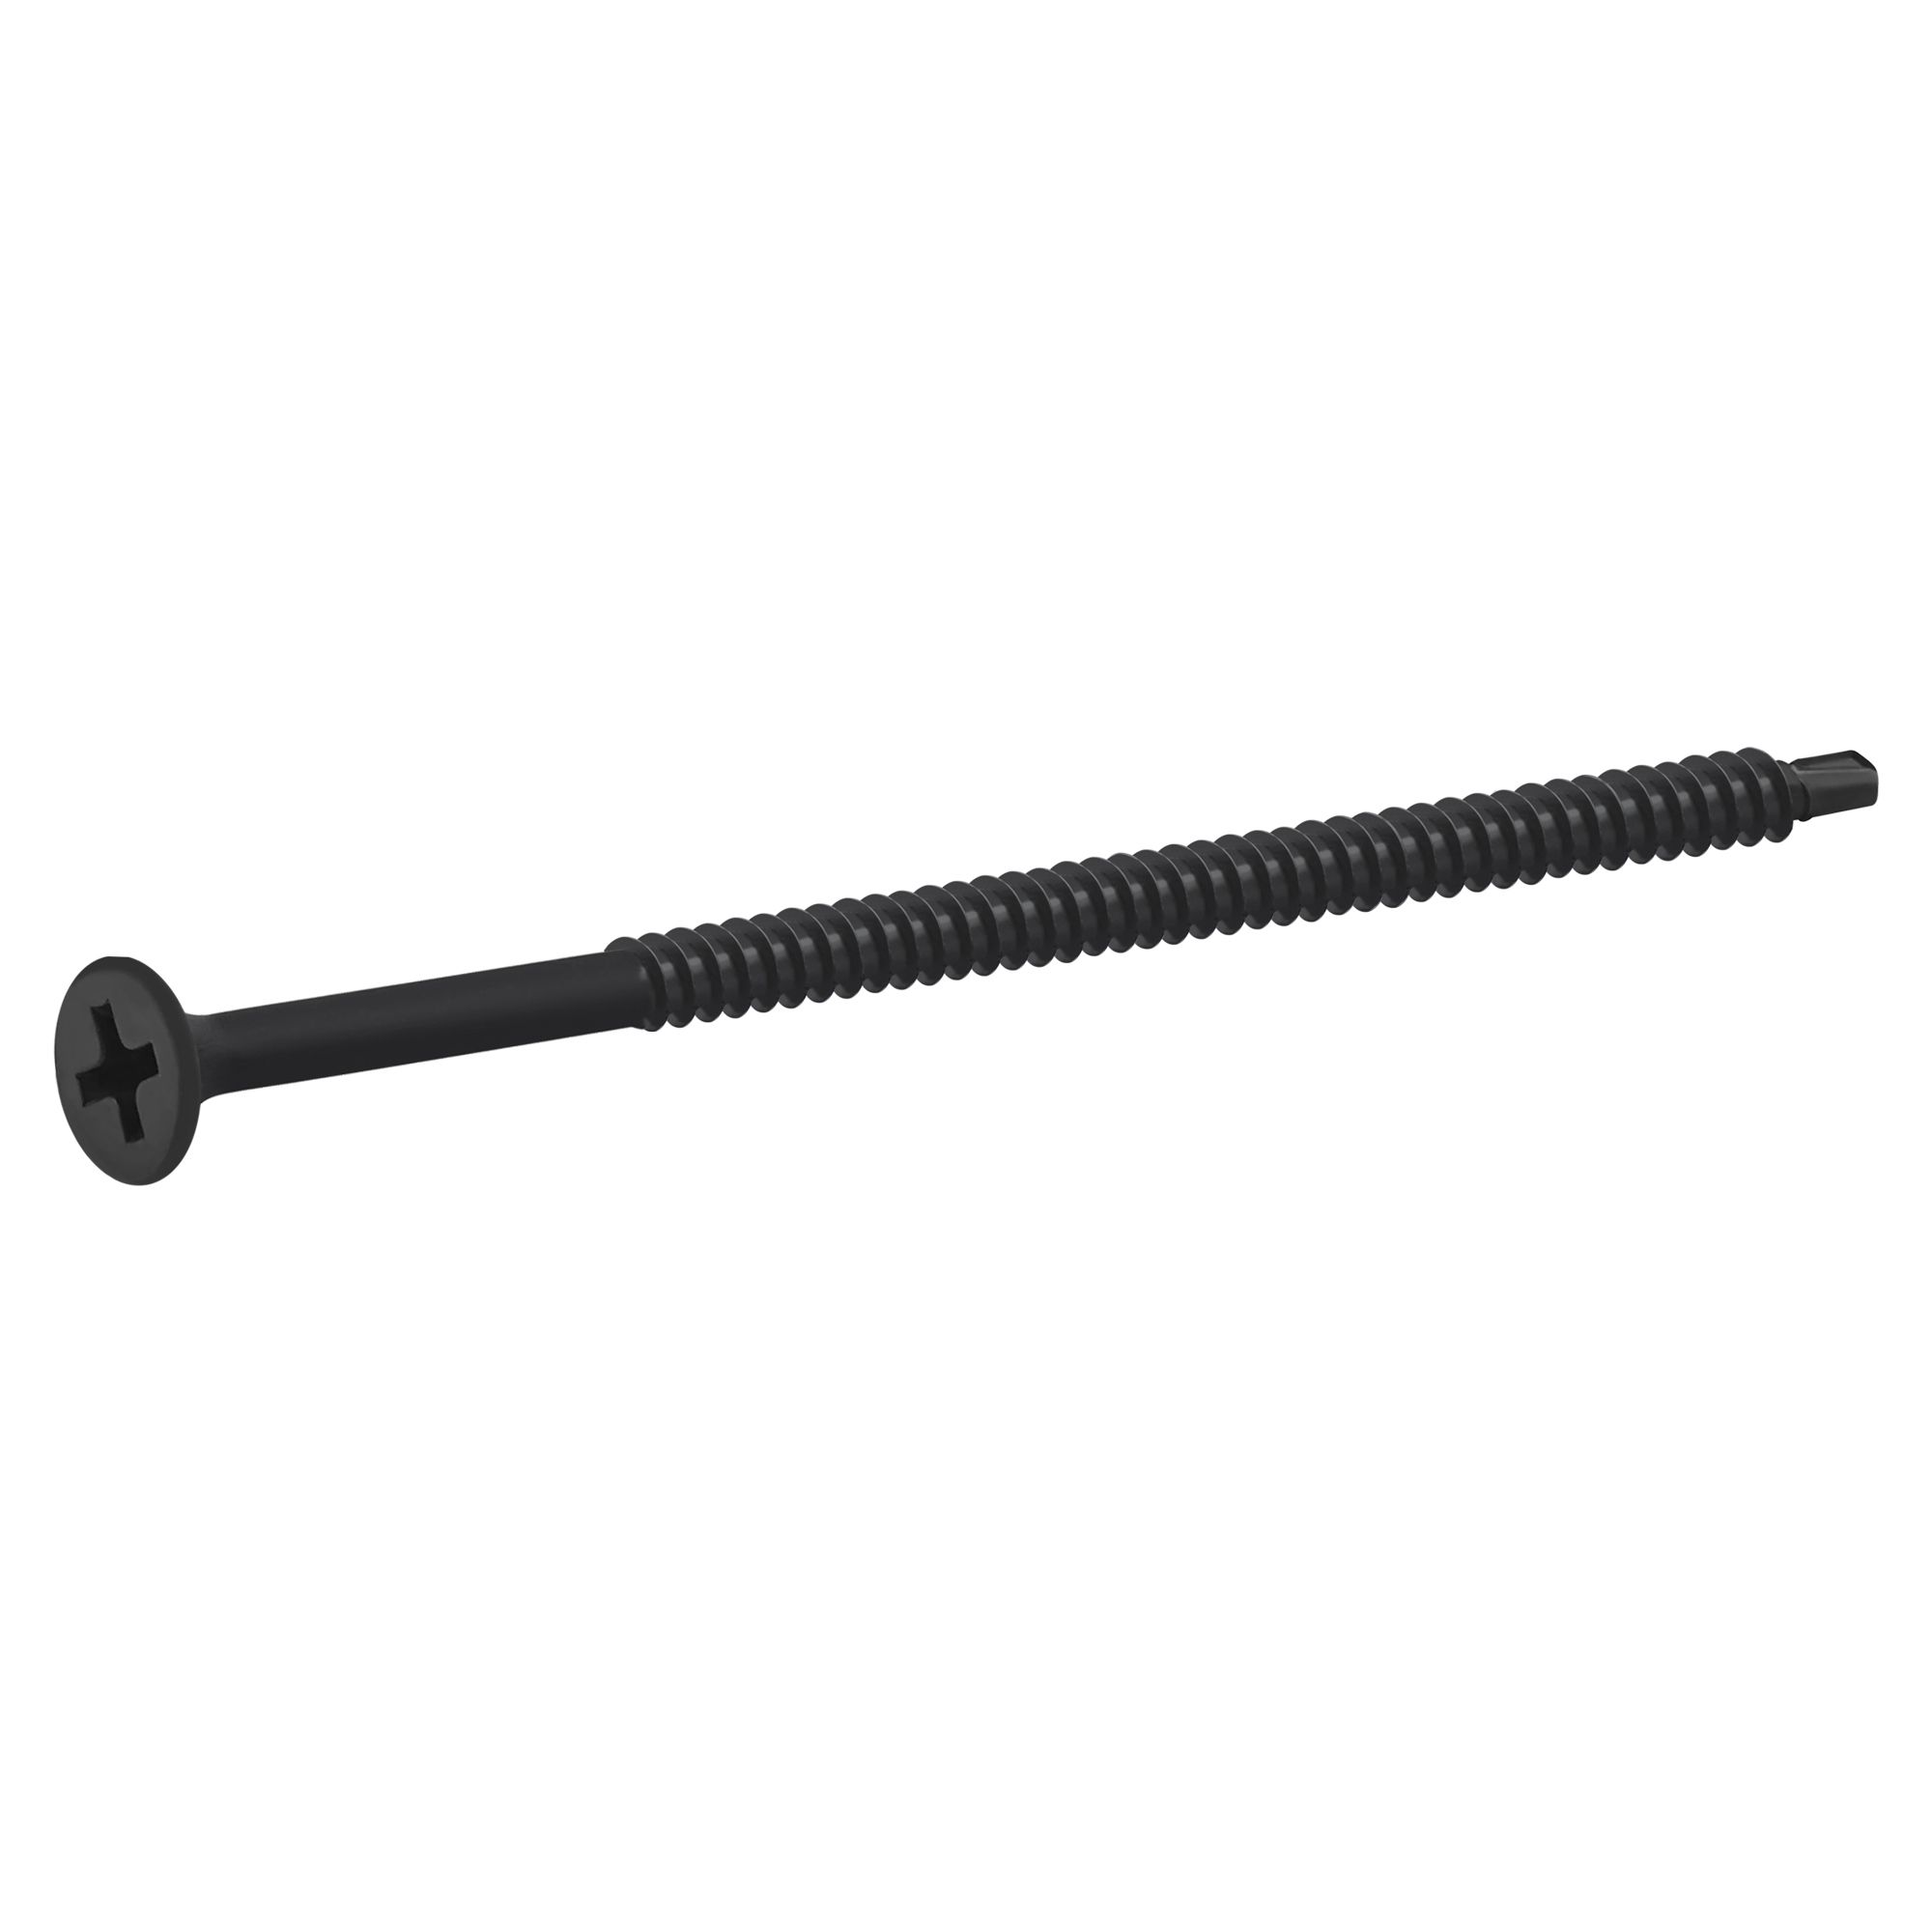 Diall Fine Iron Plasterboard screw (Dia)4.2mm (L)80mm, Pack of 200